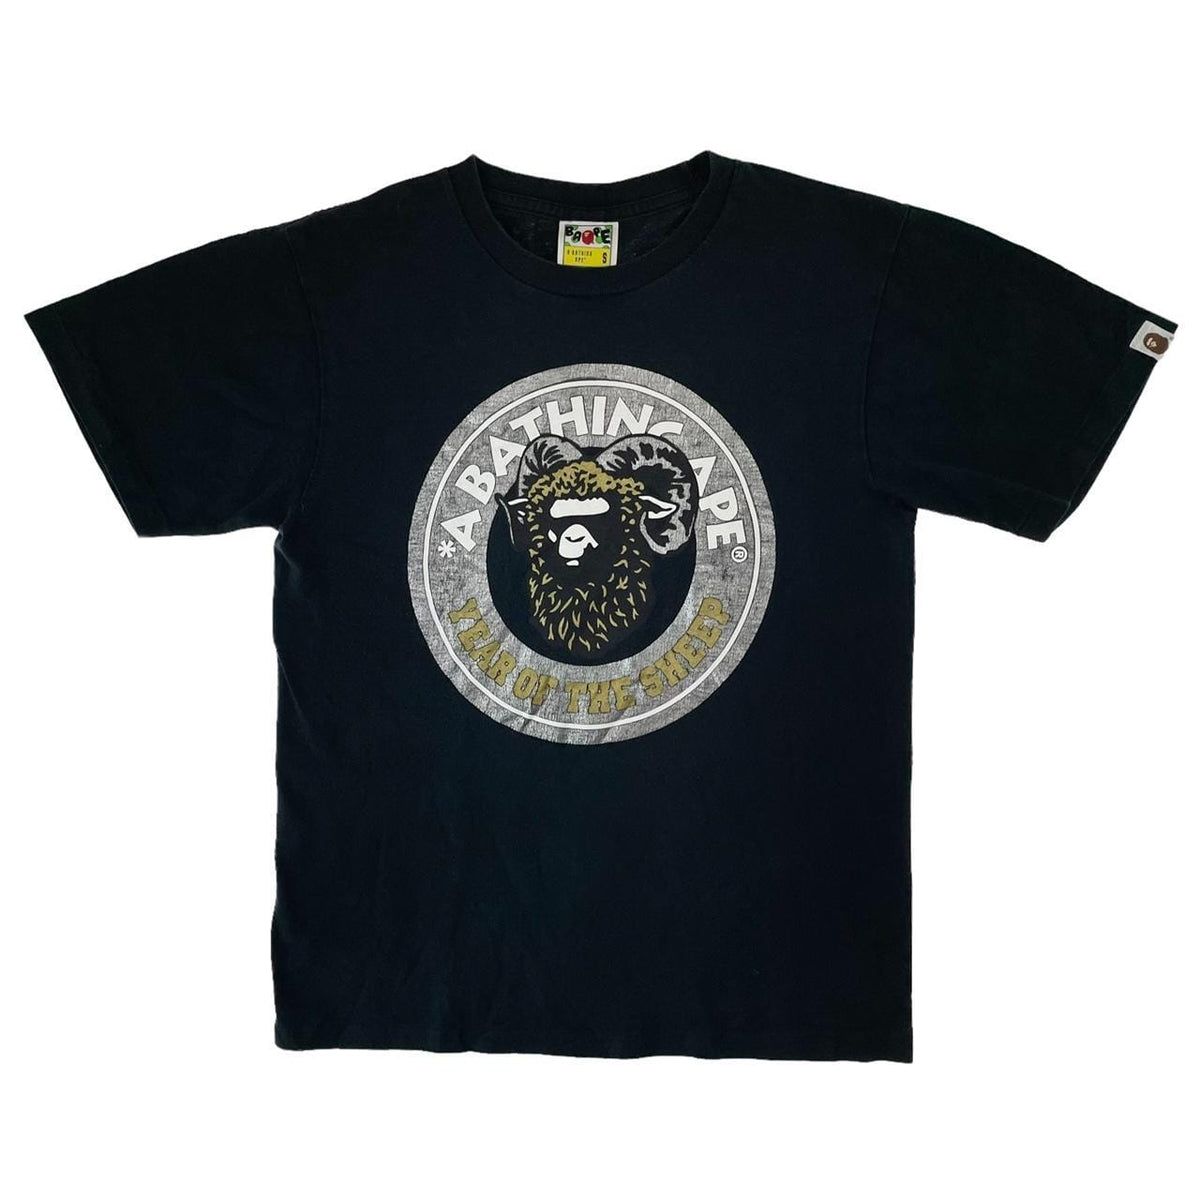 Bape year of the sheep t shirt size S